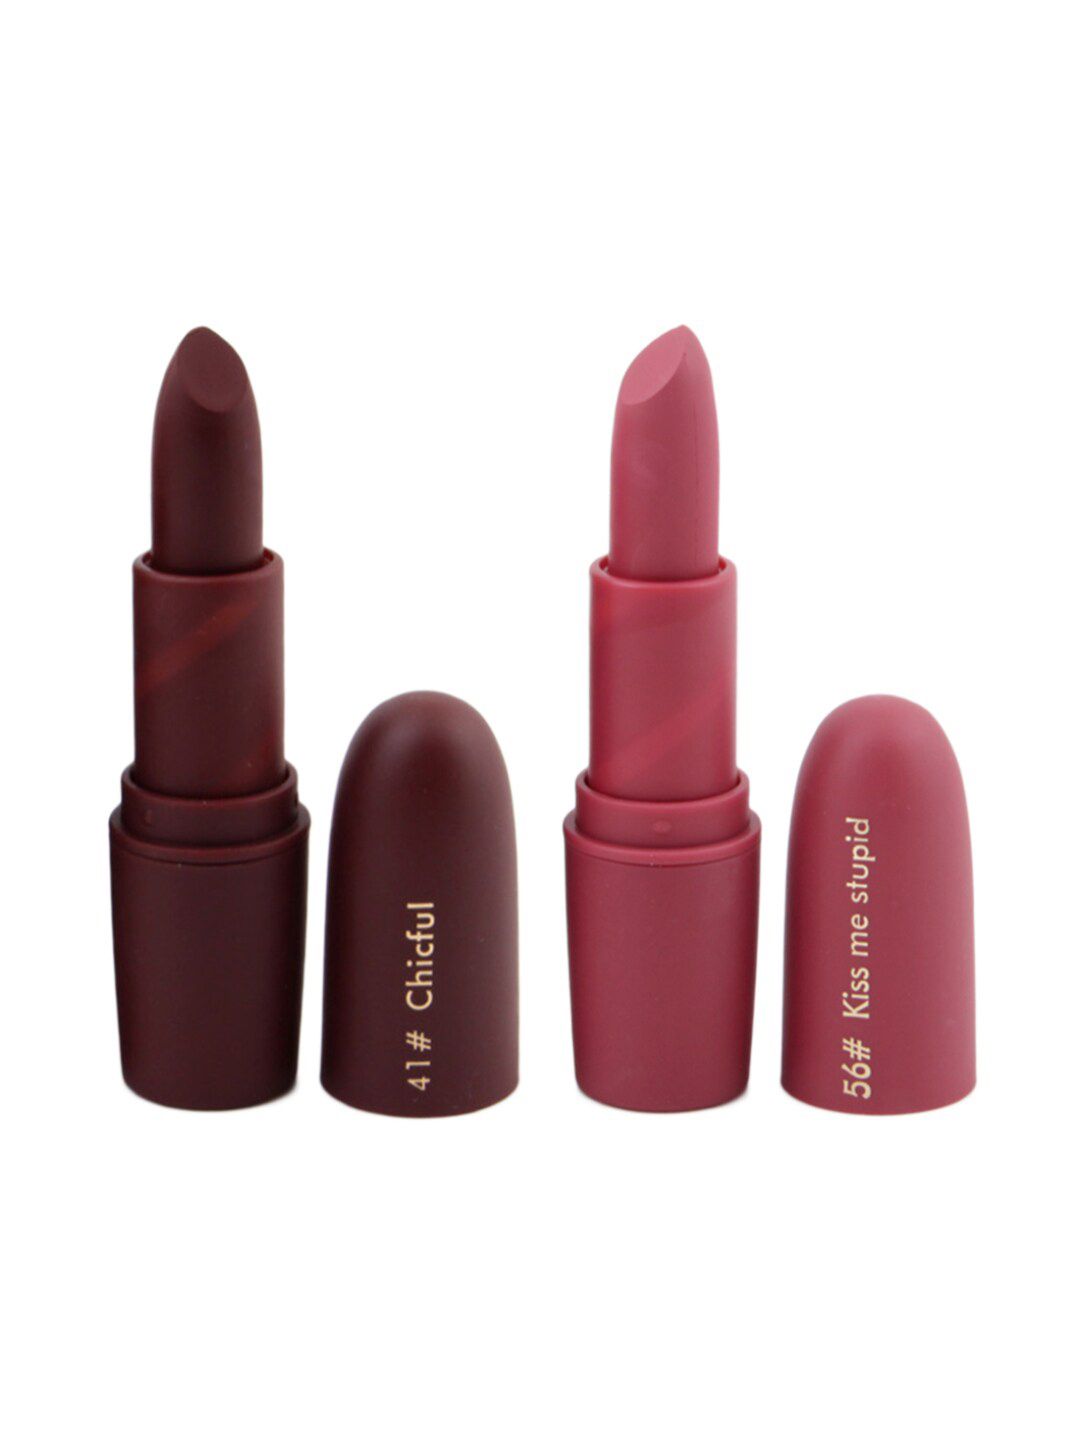 MISS ROSE Set of 2 Matte Creamy Lipsticks - Chicful 41 & Kiss Me Stupid 56 Price in India